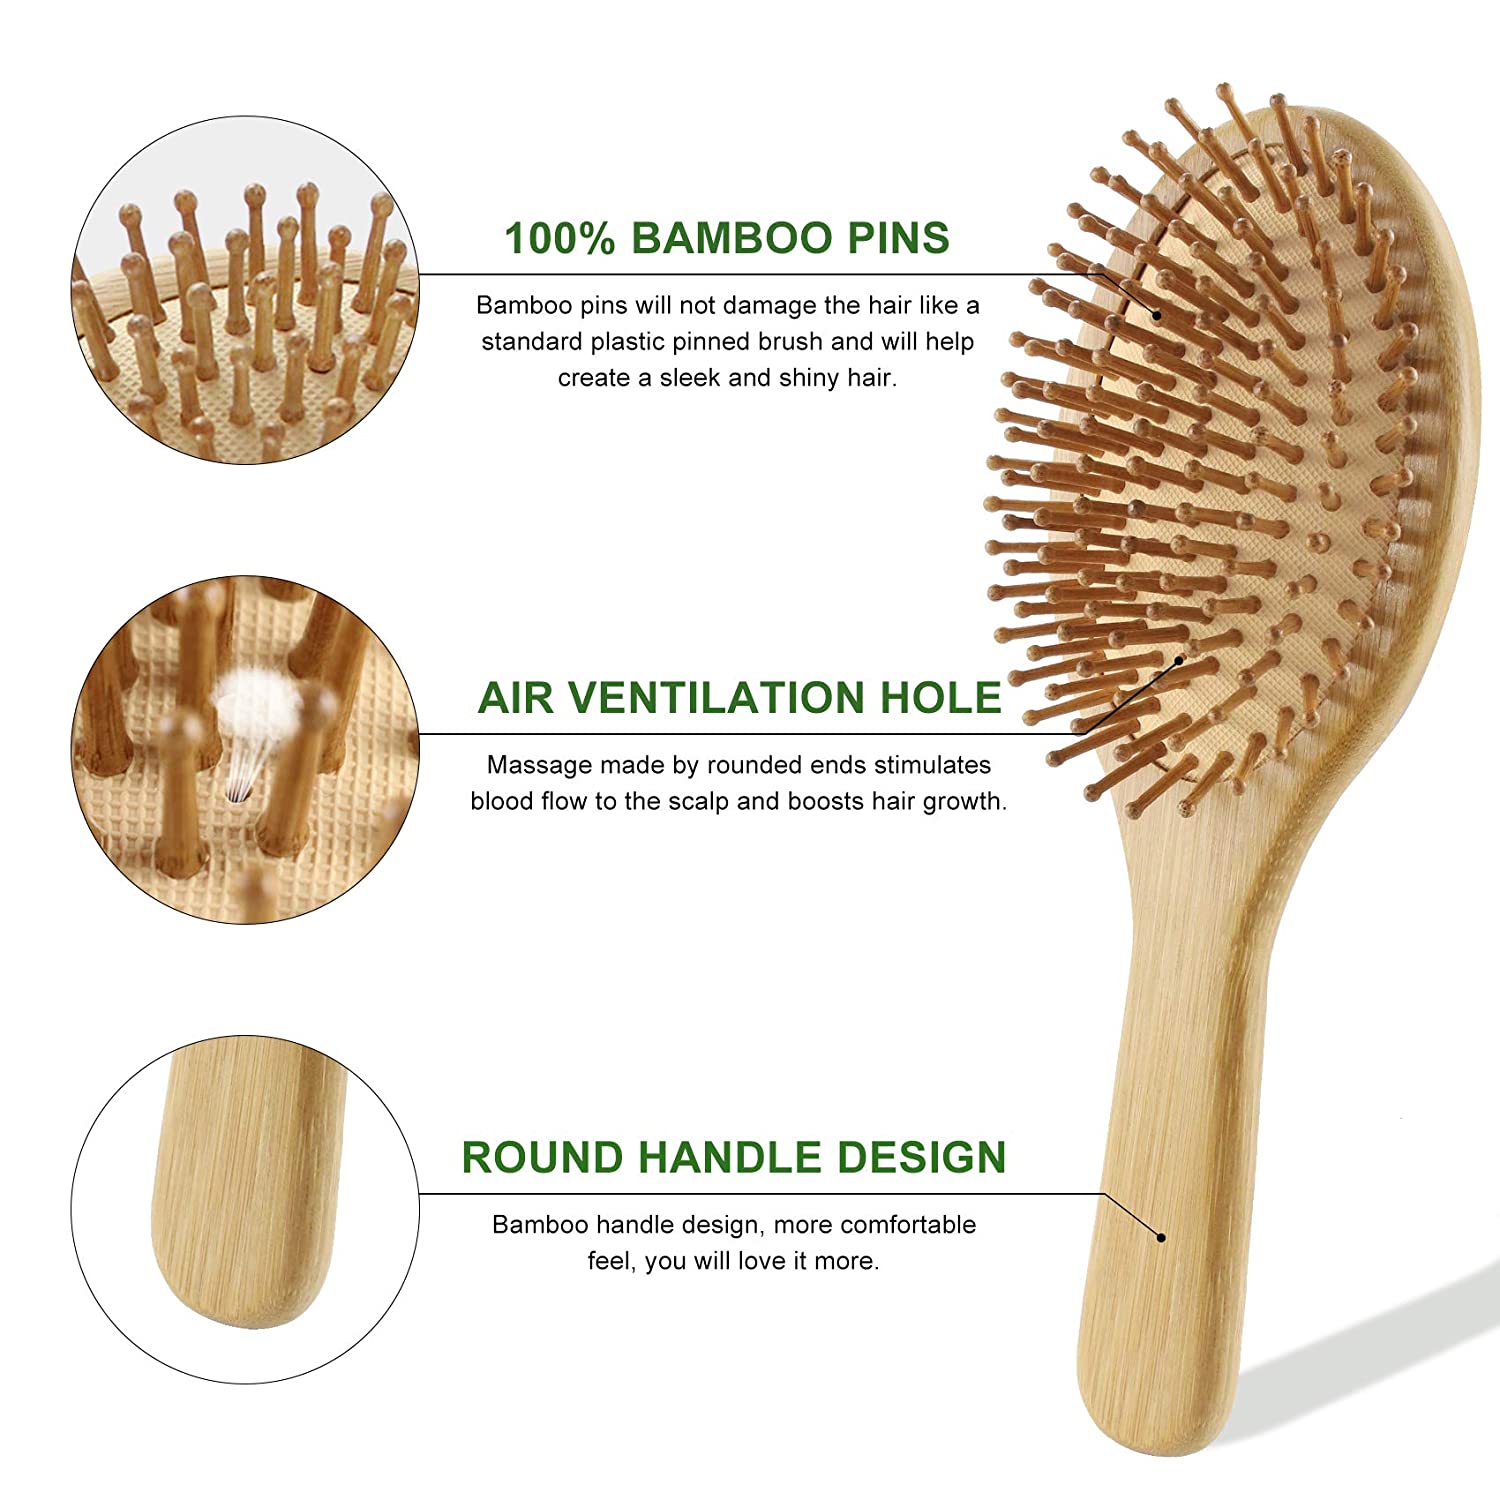 Masthome 3PCS Natural Bamboo Brushes Set for Household